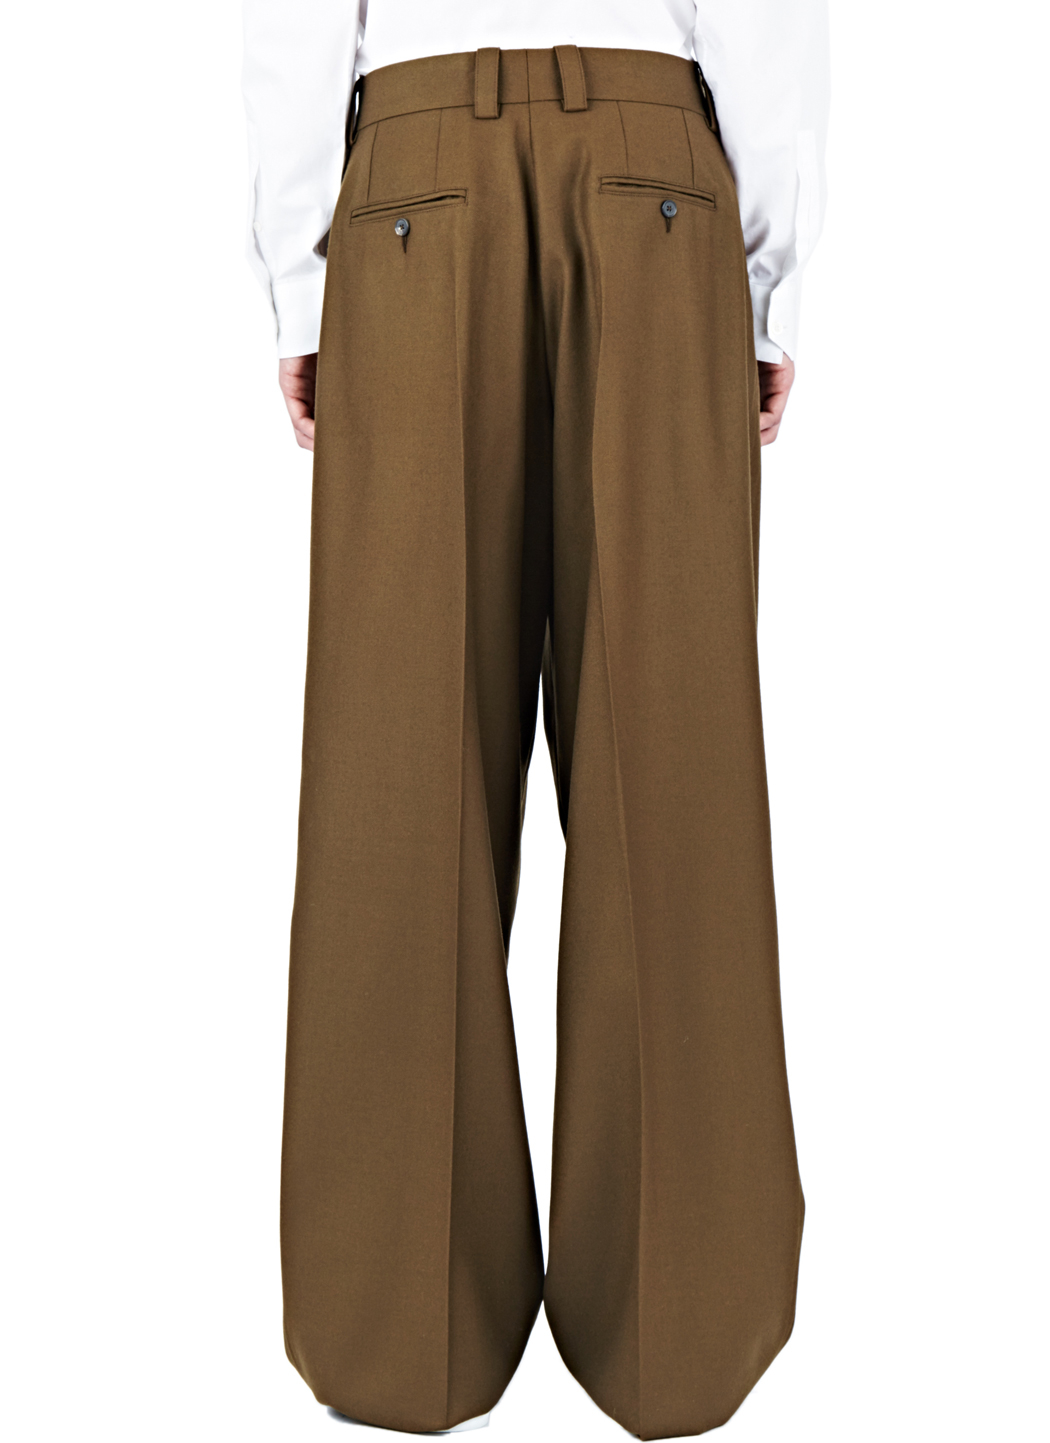 Lyst - Marni Oversized Wide Leg Pants in Brown for Men